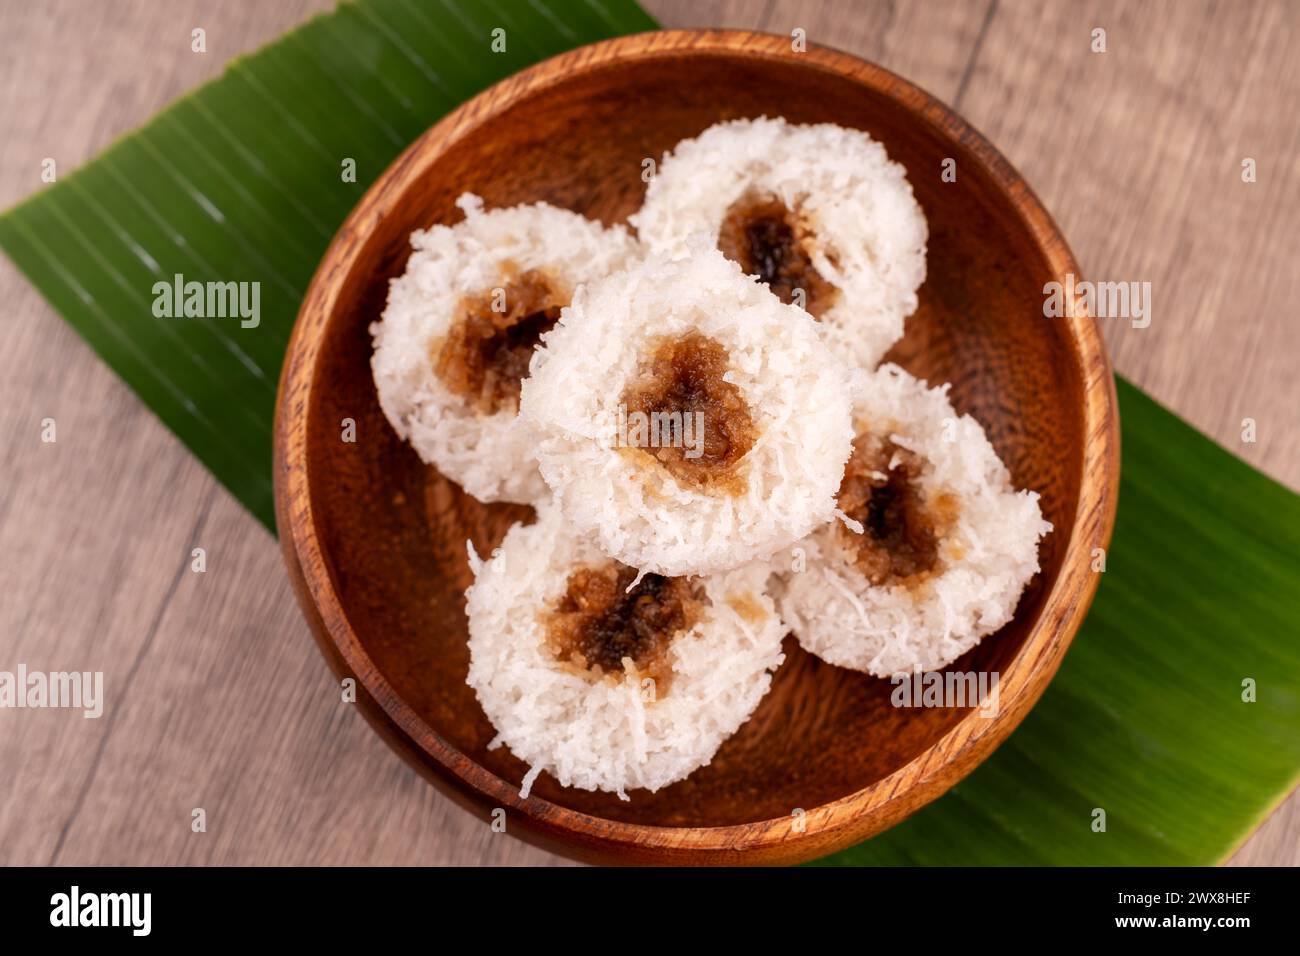 High angle view of putu bambu or steamed rice flour cake with grated coconut and palm sugar filling Stock Photo